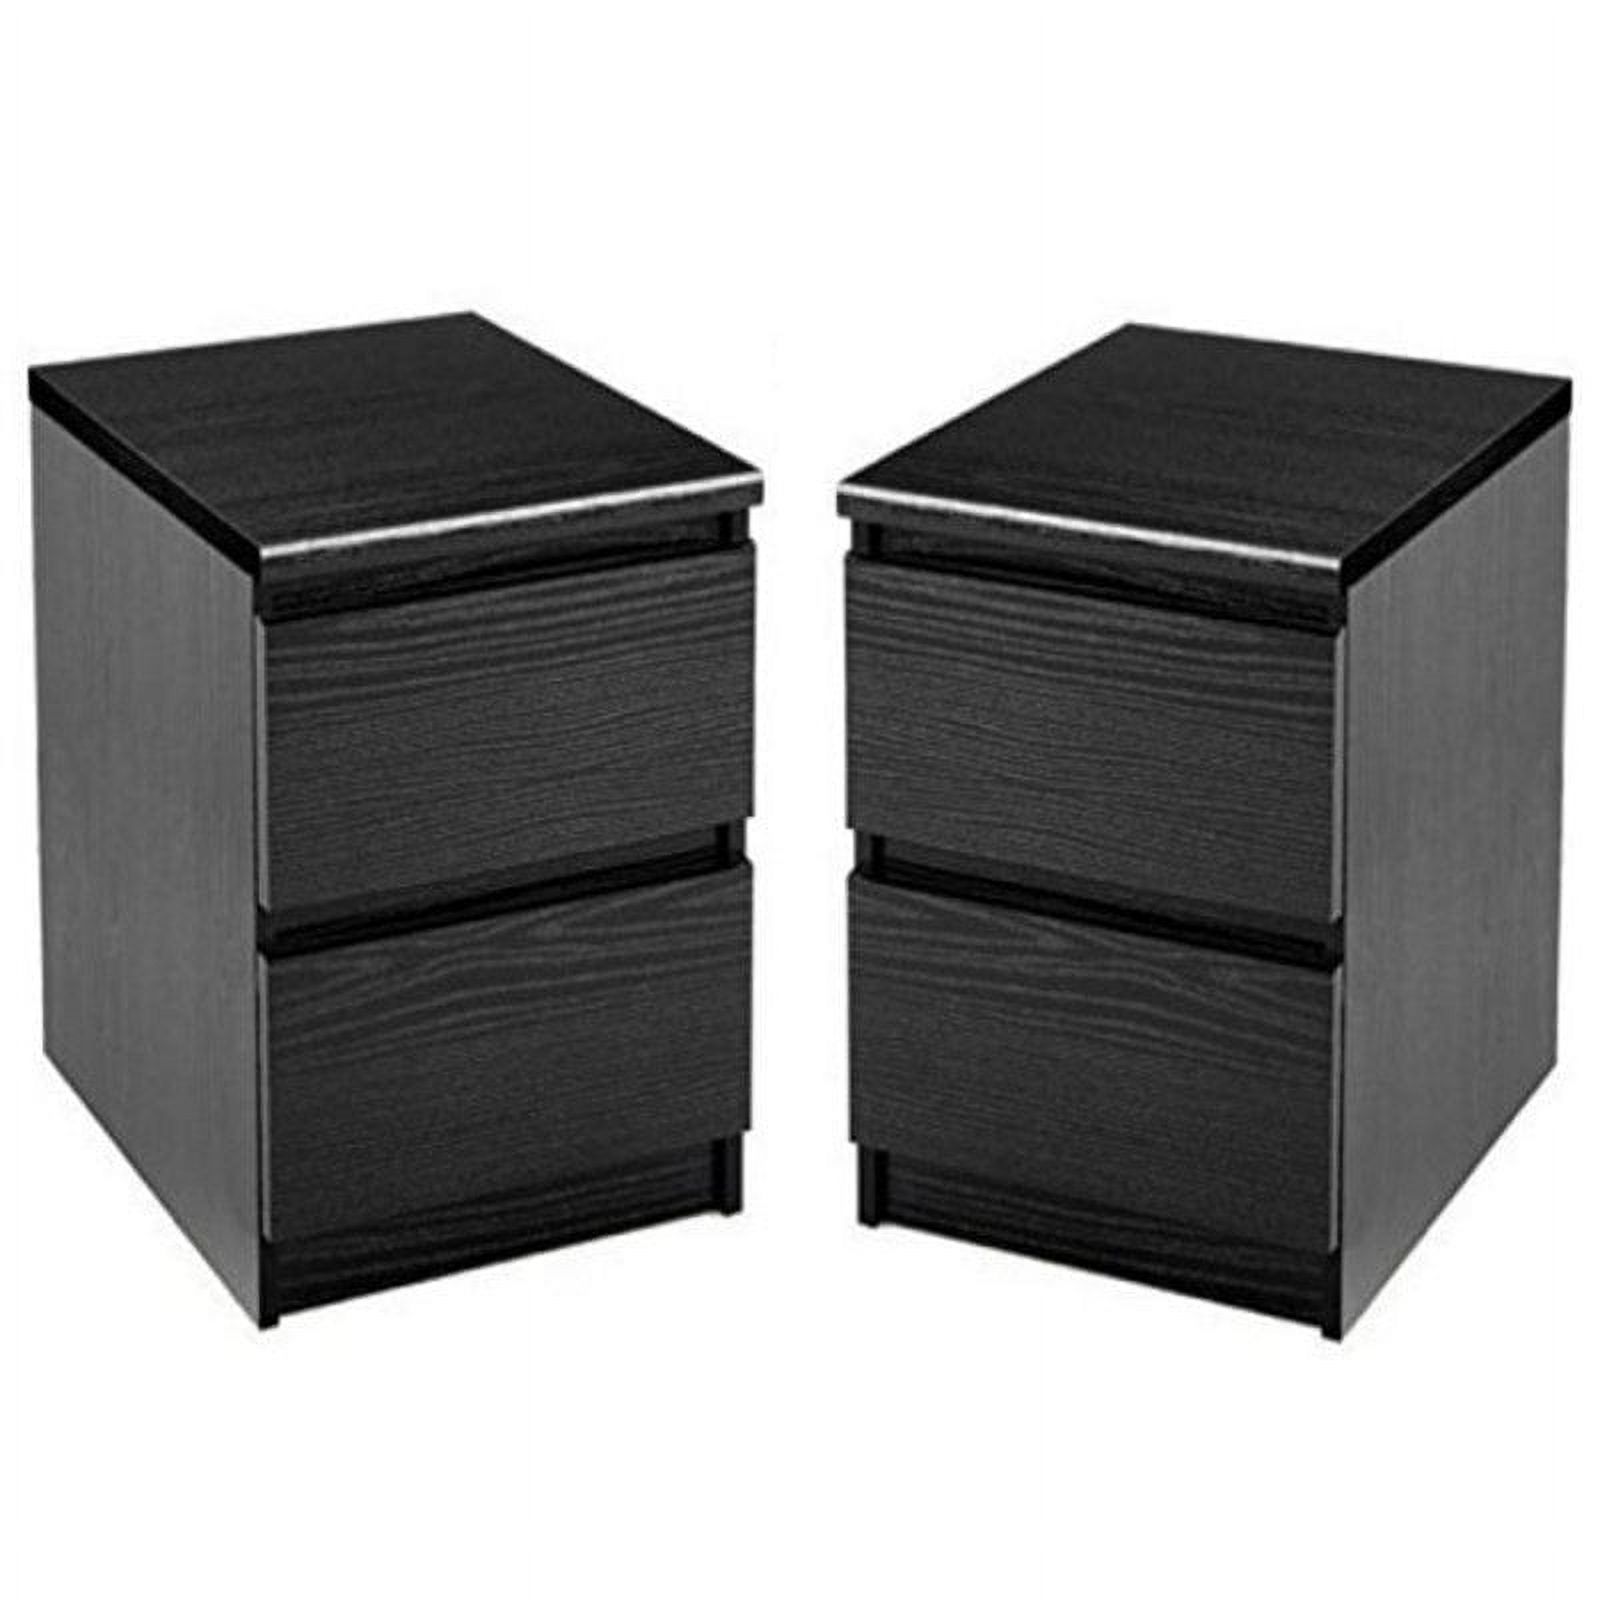 Home Square 2 Drawer Night Stands in Black Woodgrain (Set of 2) - image 1 of 4